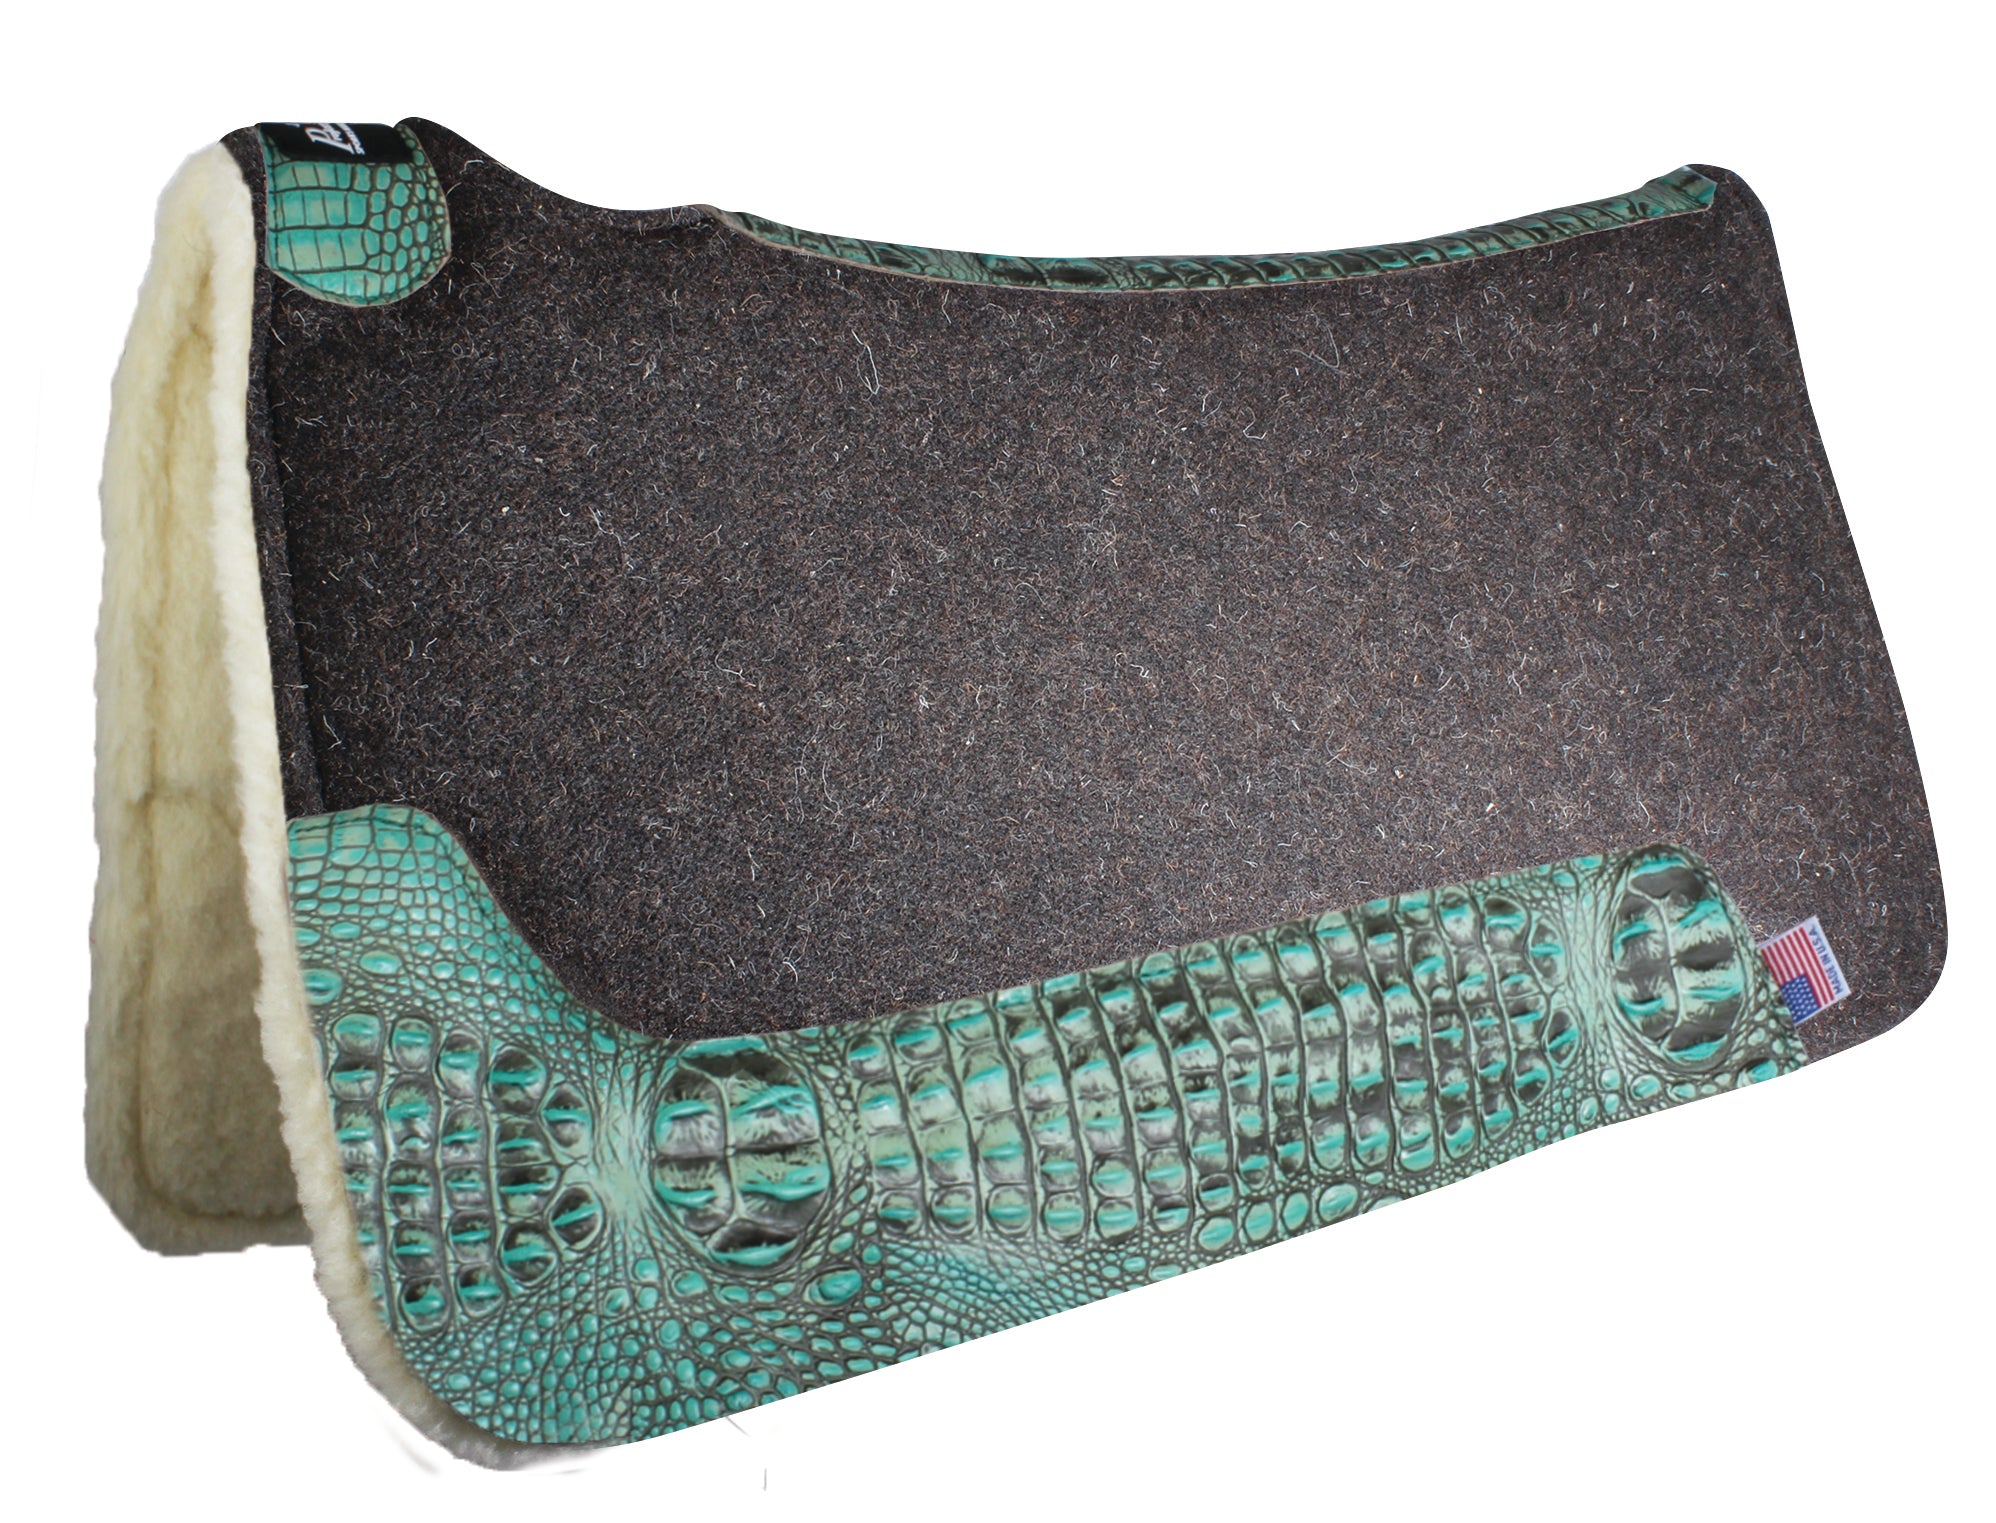 Cowboy Felt Air Ride Saddle Pad - Merino Wool-Saddle Pads-Professionals Choice-Lucky J Boots & More, Women's, Men's, & Kids Western Store Located in Carthage, MO